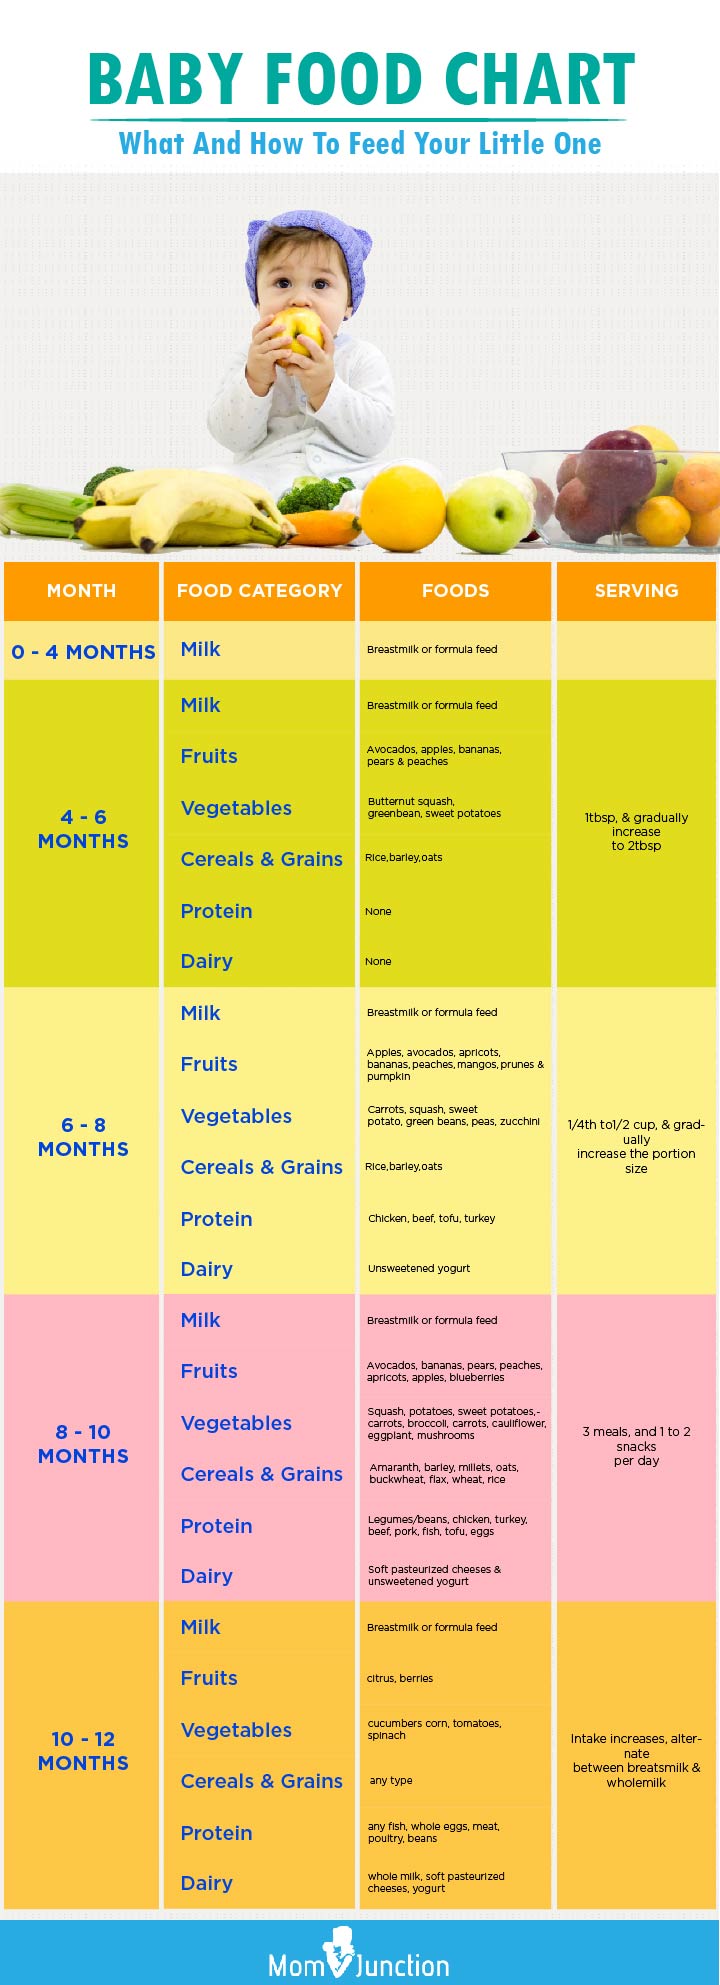 baby-food-chart-what-and-how-to-feed-your-little-one